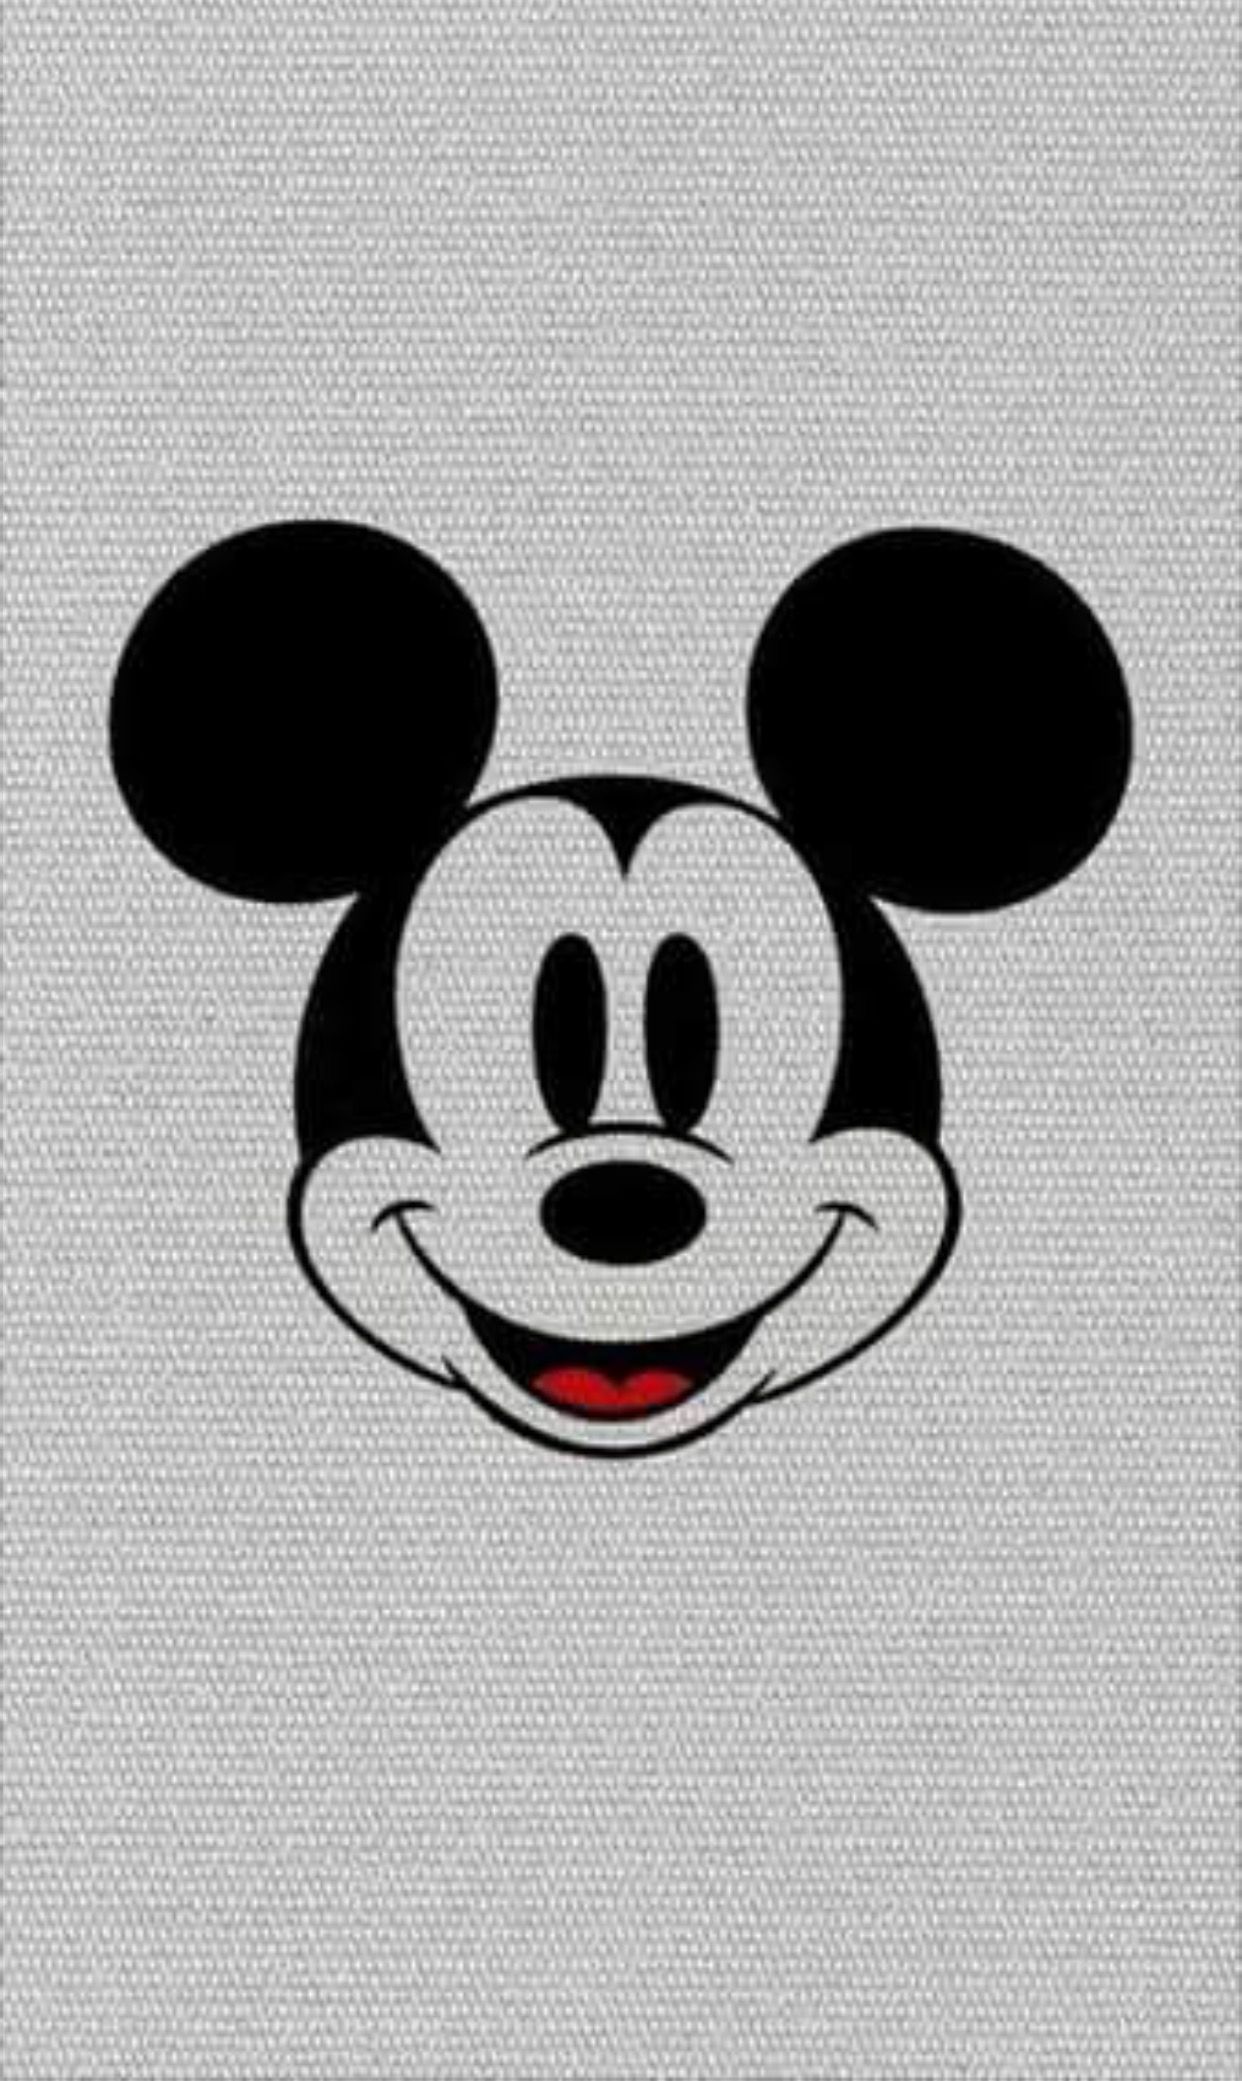 Mickey mouse face on a white background - Mickey Mouse